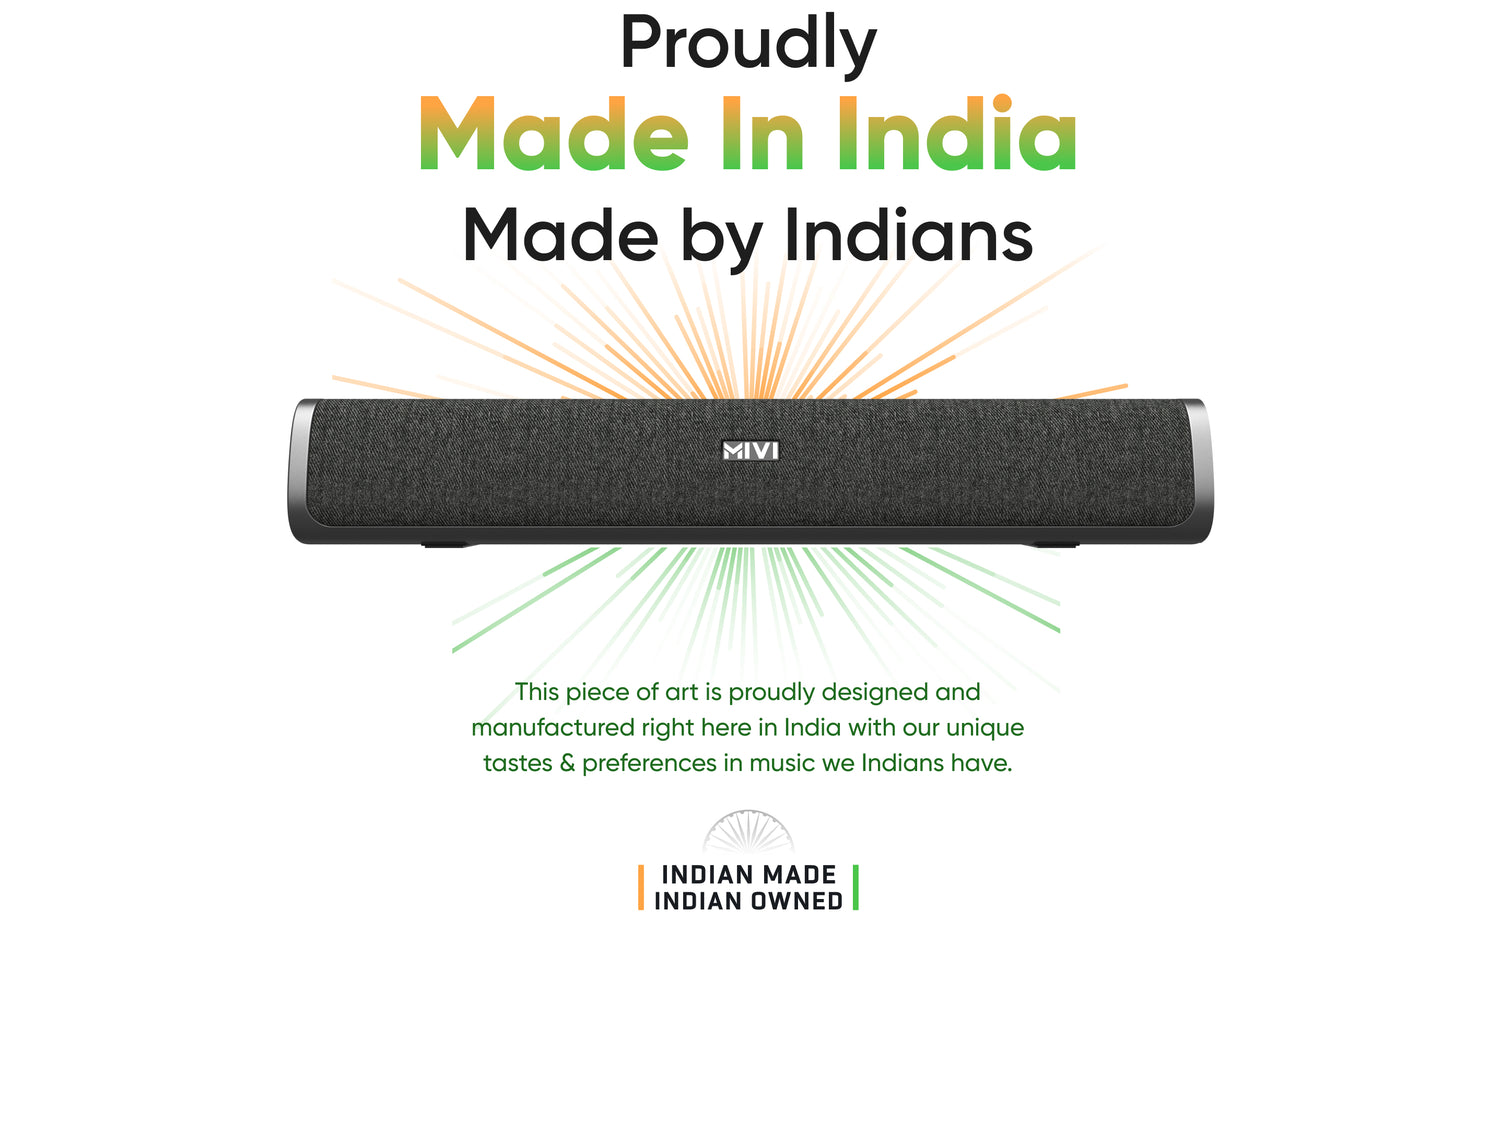 Proudly Made in India Made by Indians - This piece of art is proudly designed and manufactured right here in India with our unique tastes & preferences in music we Indians have.